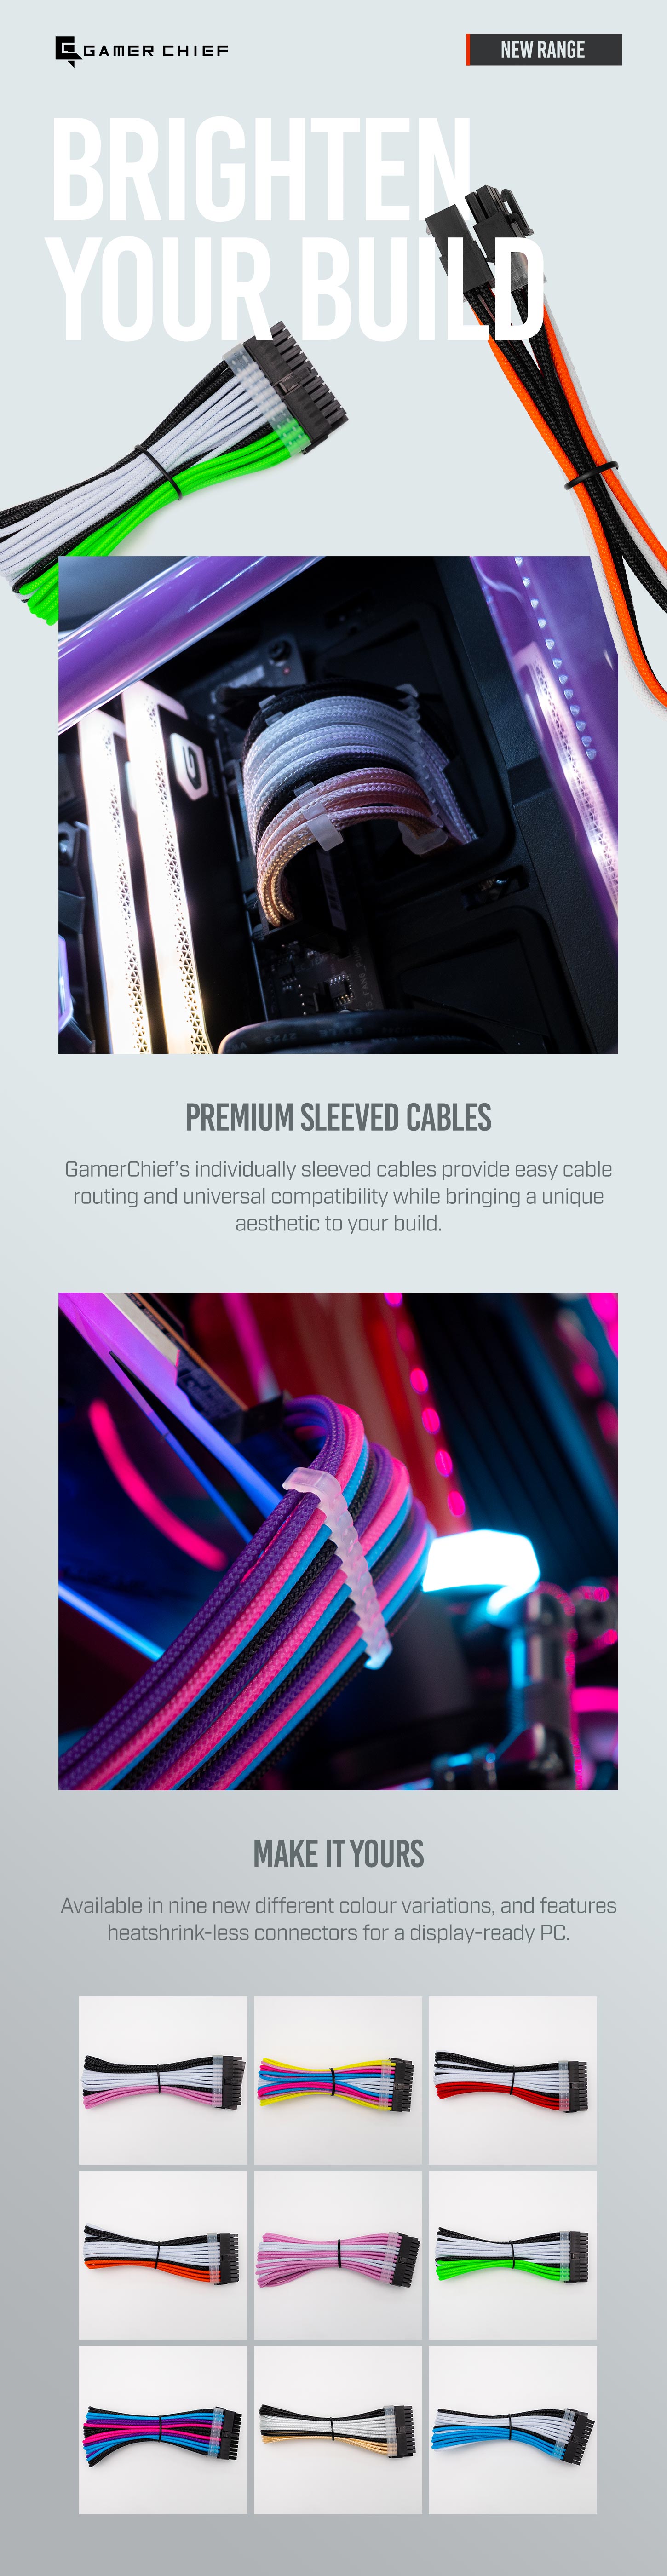 A large marketing image providing additional information about the product GamerChief Elite Series 6-Pin PCIe 30cm Sleeved Extension Cable (Red/White/Black) - Additional alt info not provided